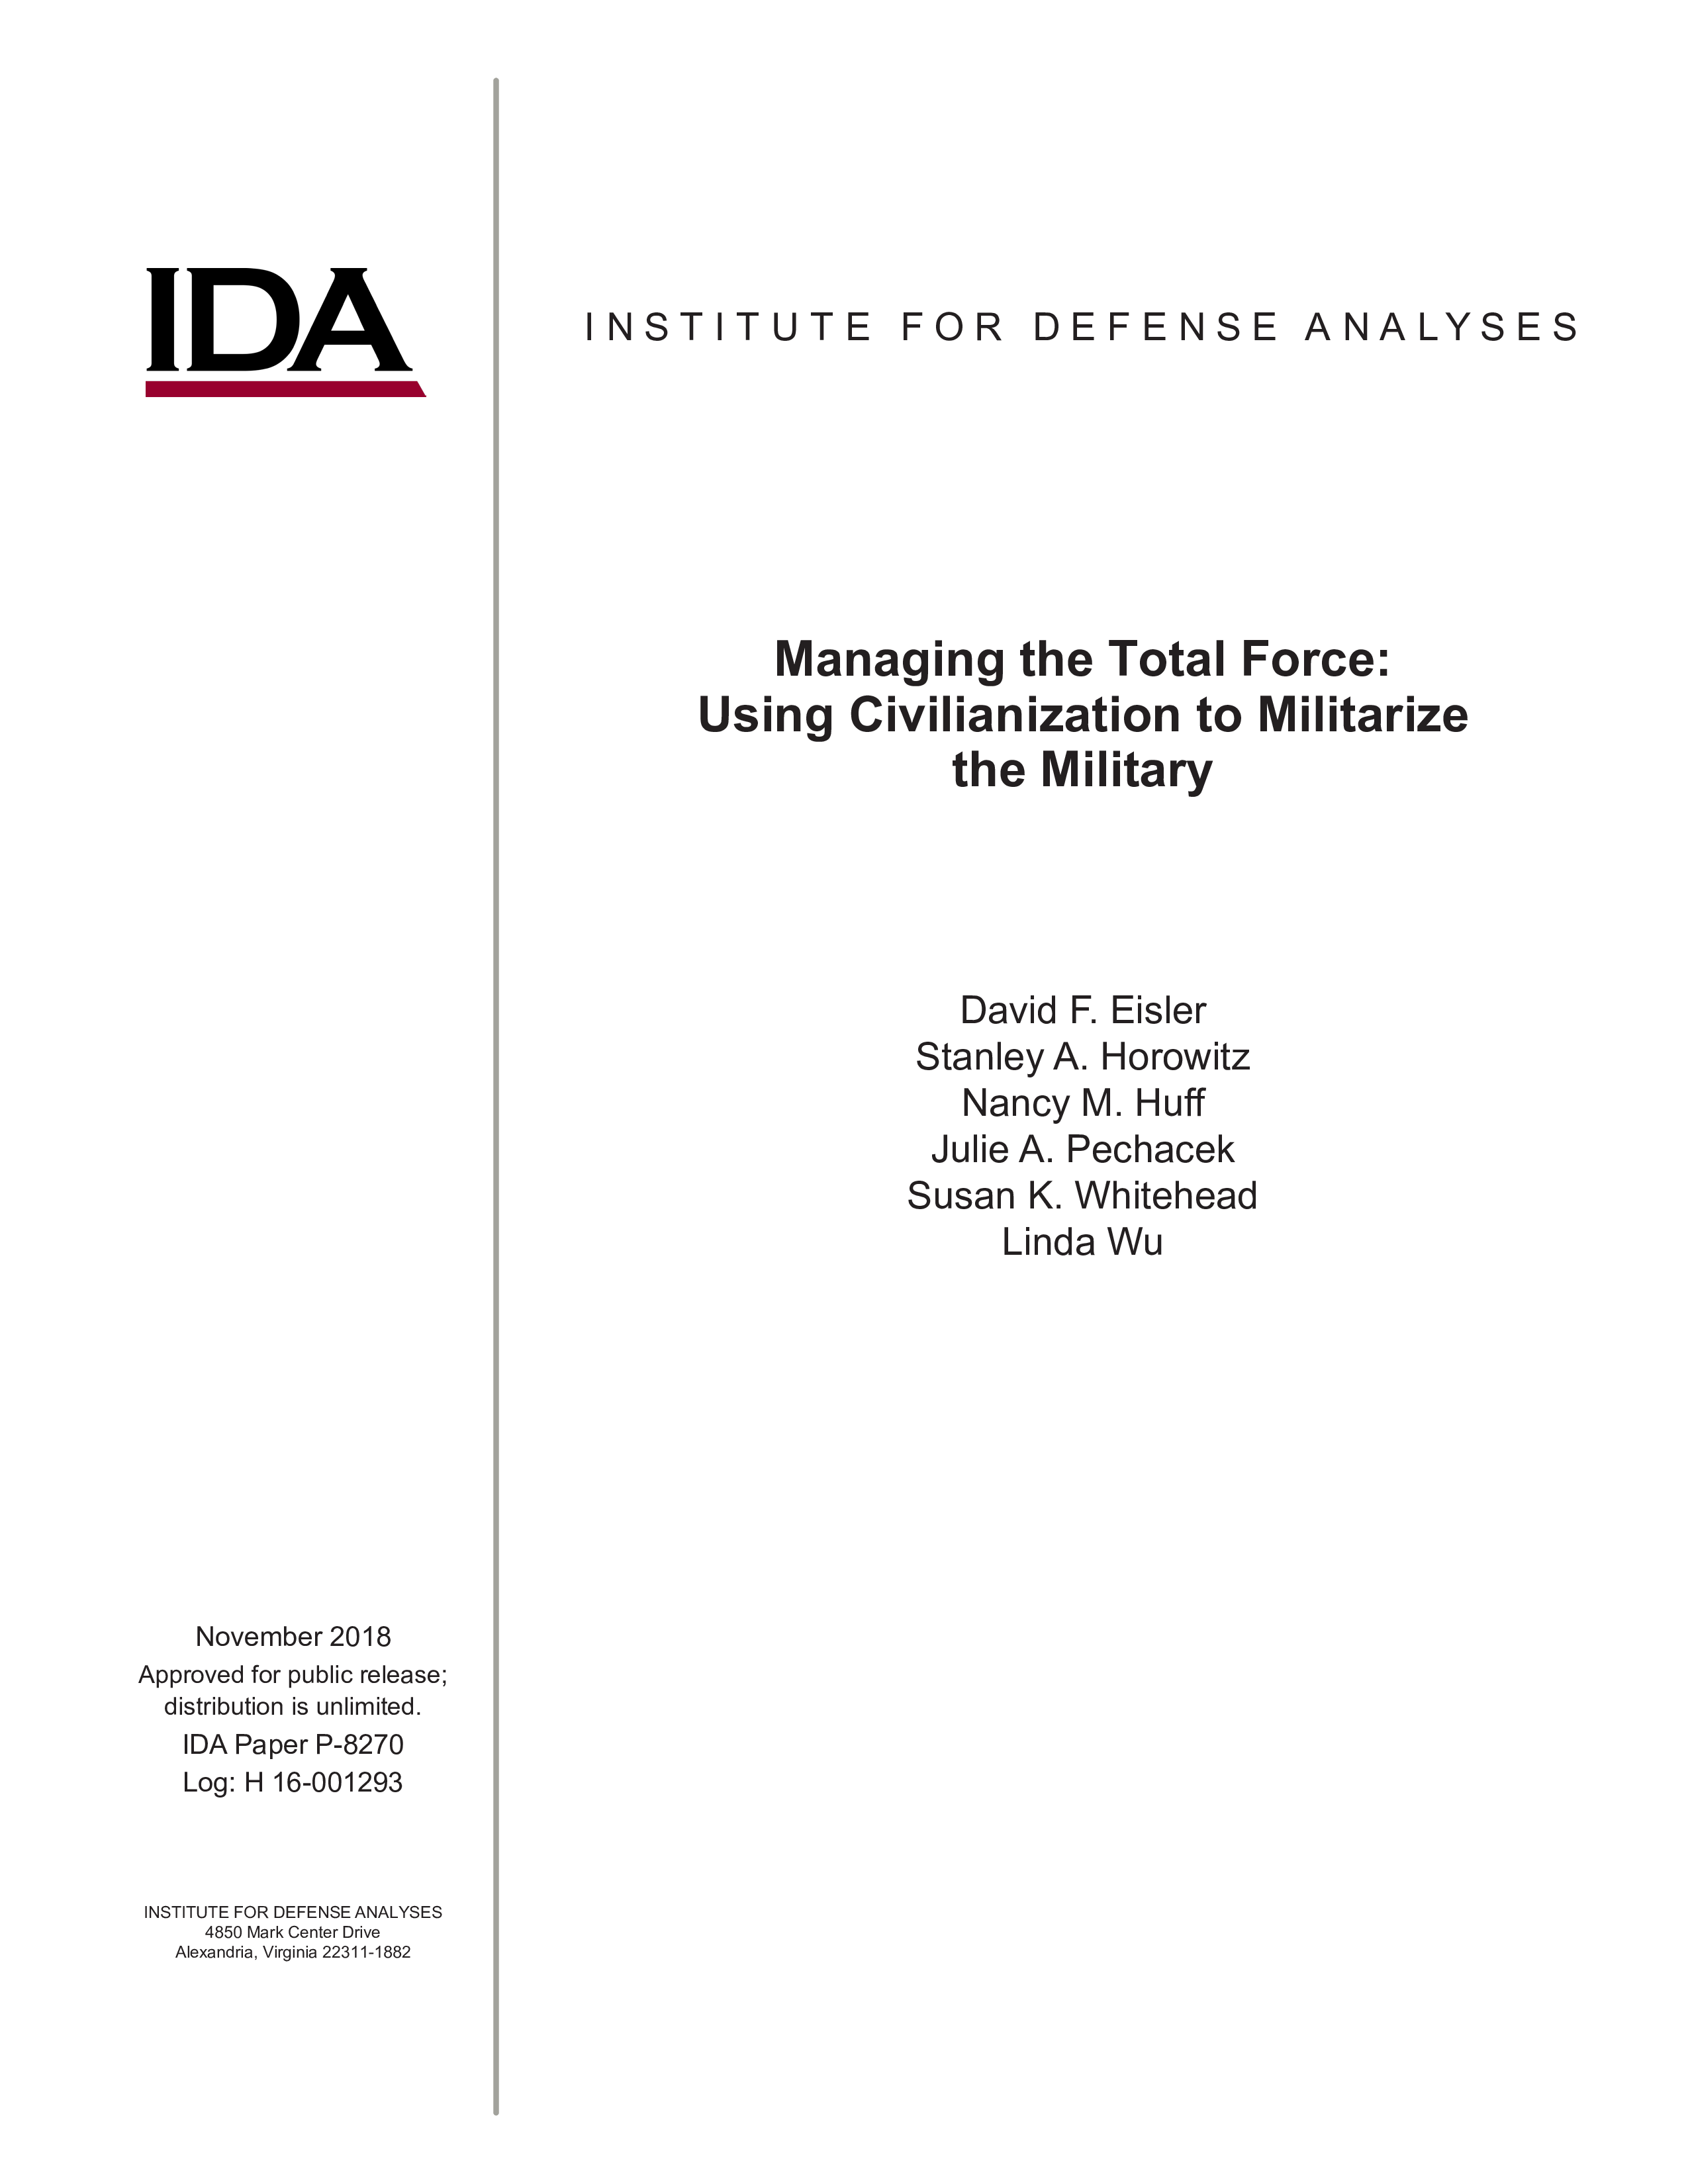 Managing the Total Force: Using Civilianization to Militarize the Military